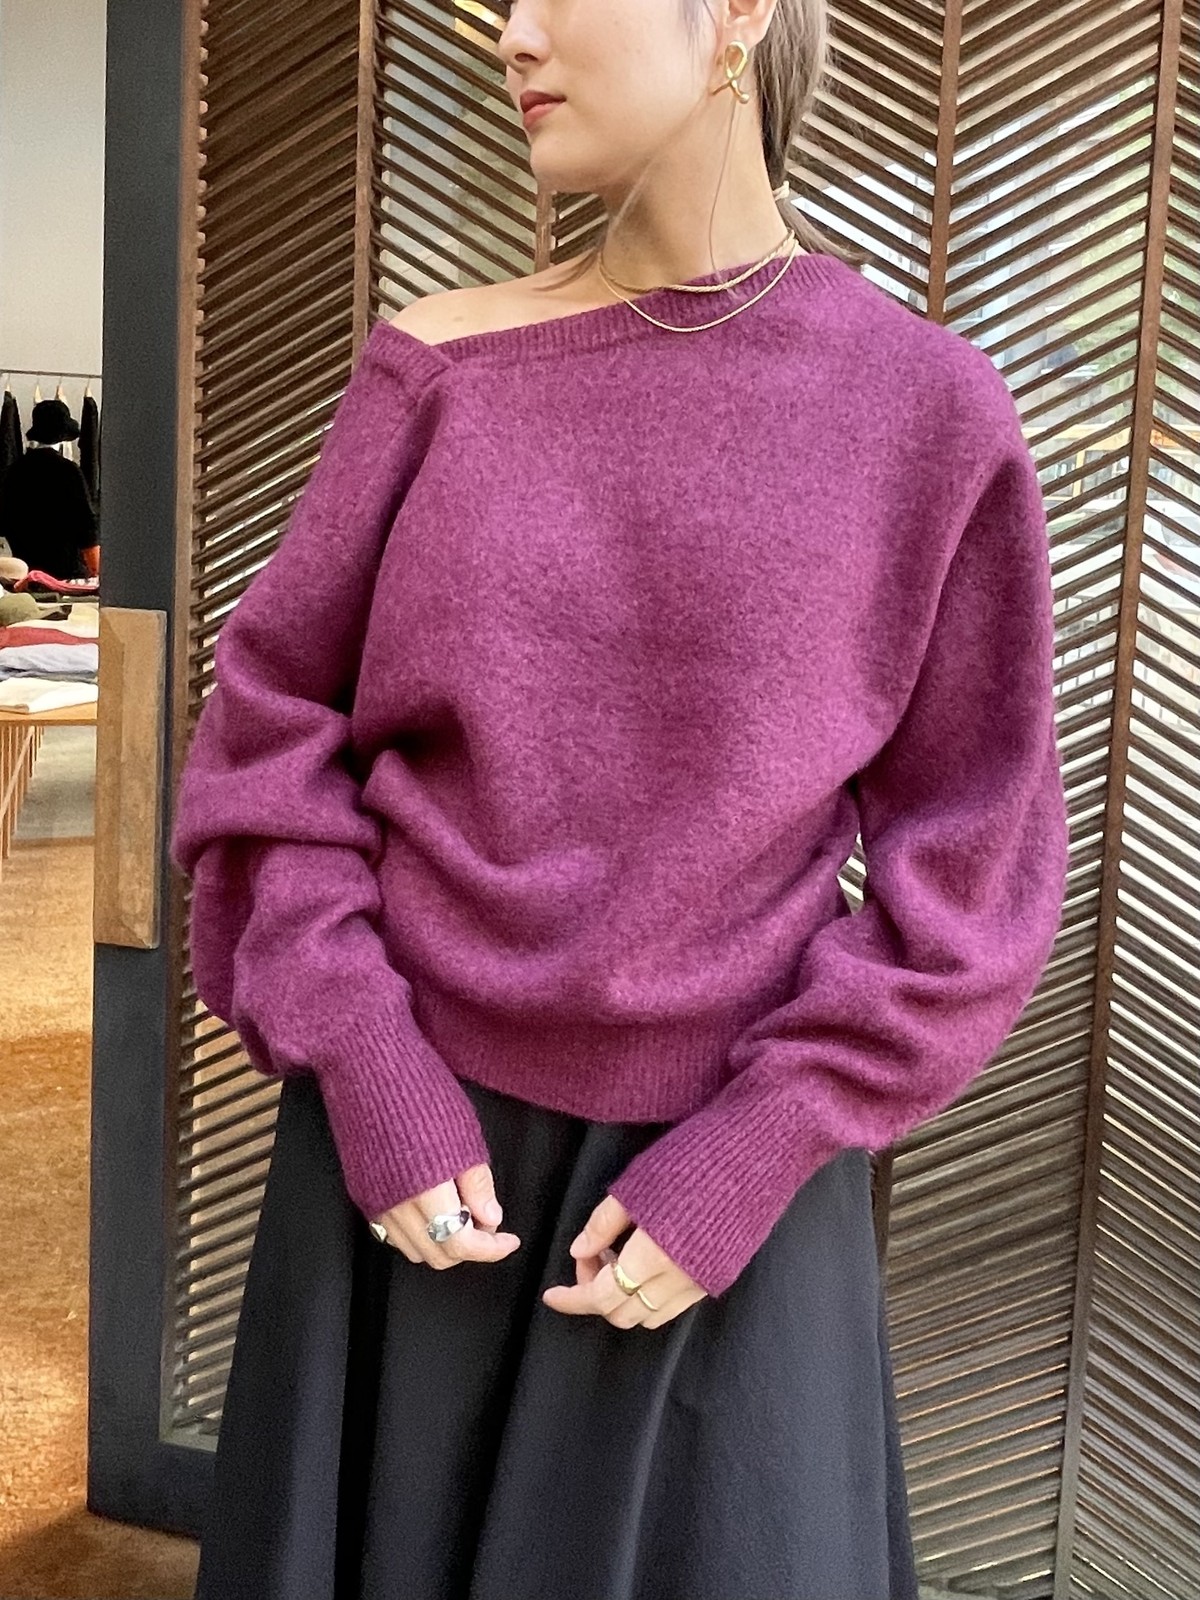 CLANE BOAT NECK NO SLEEVE KNIT TOPS | www.myglobaltax.com